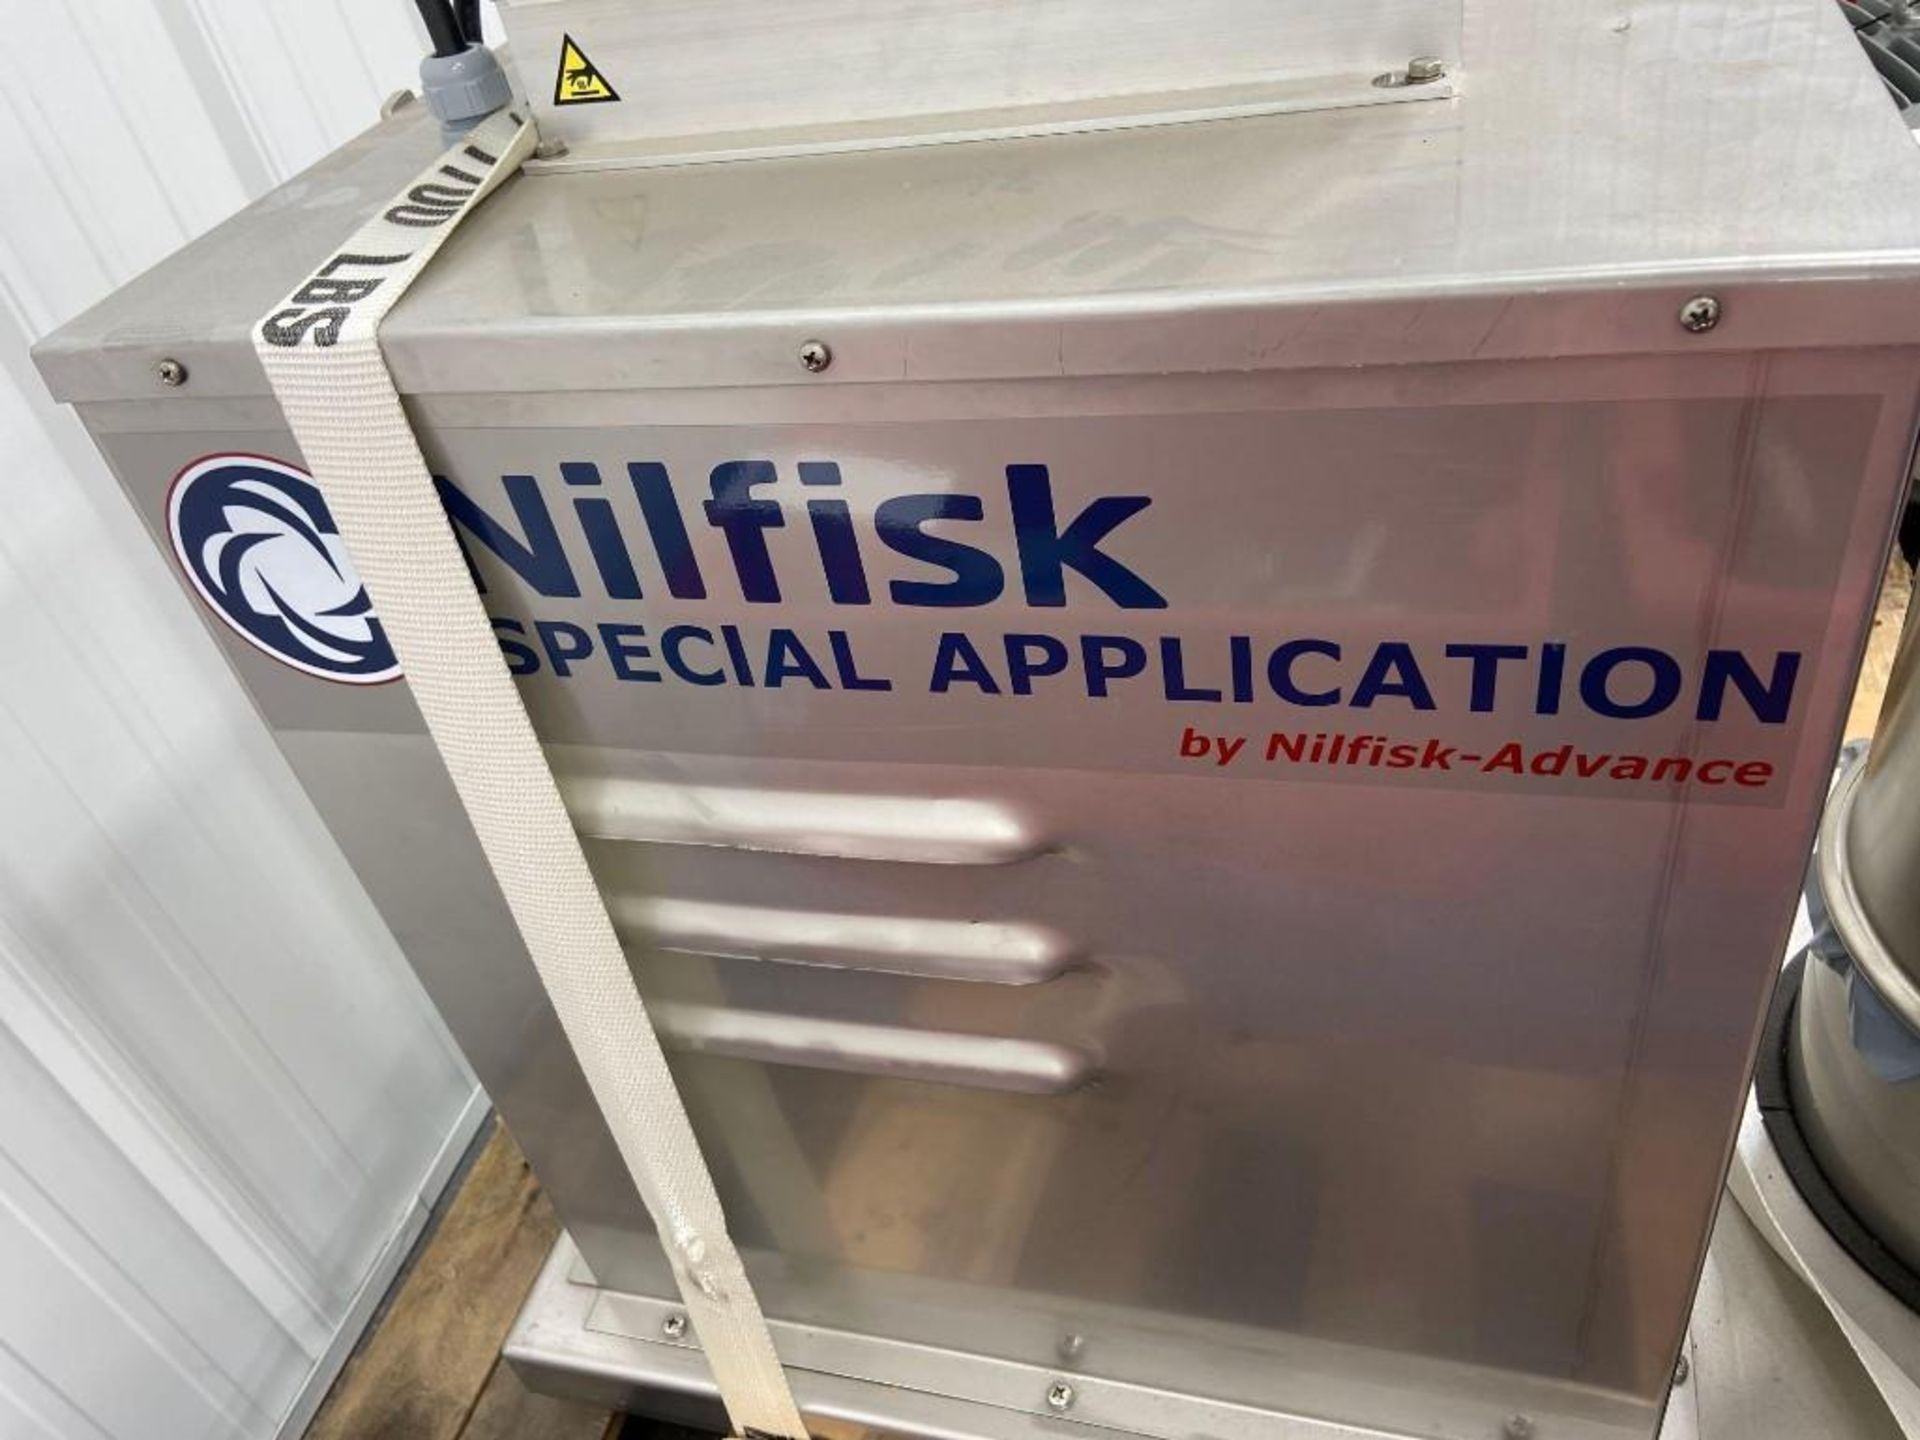 Nilfisk Special Application 5099 Reinraum 0.75 SN:14135T - Image 4 of 5